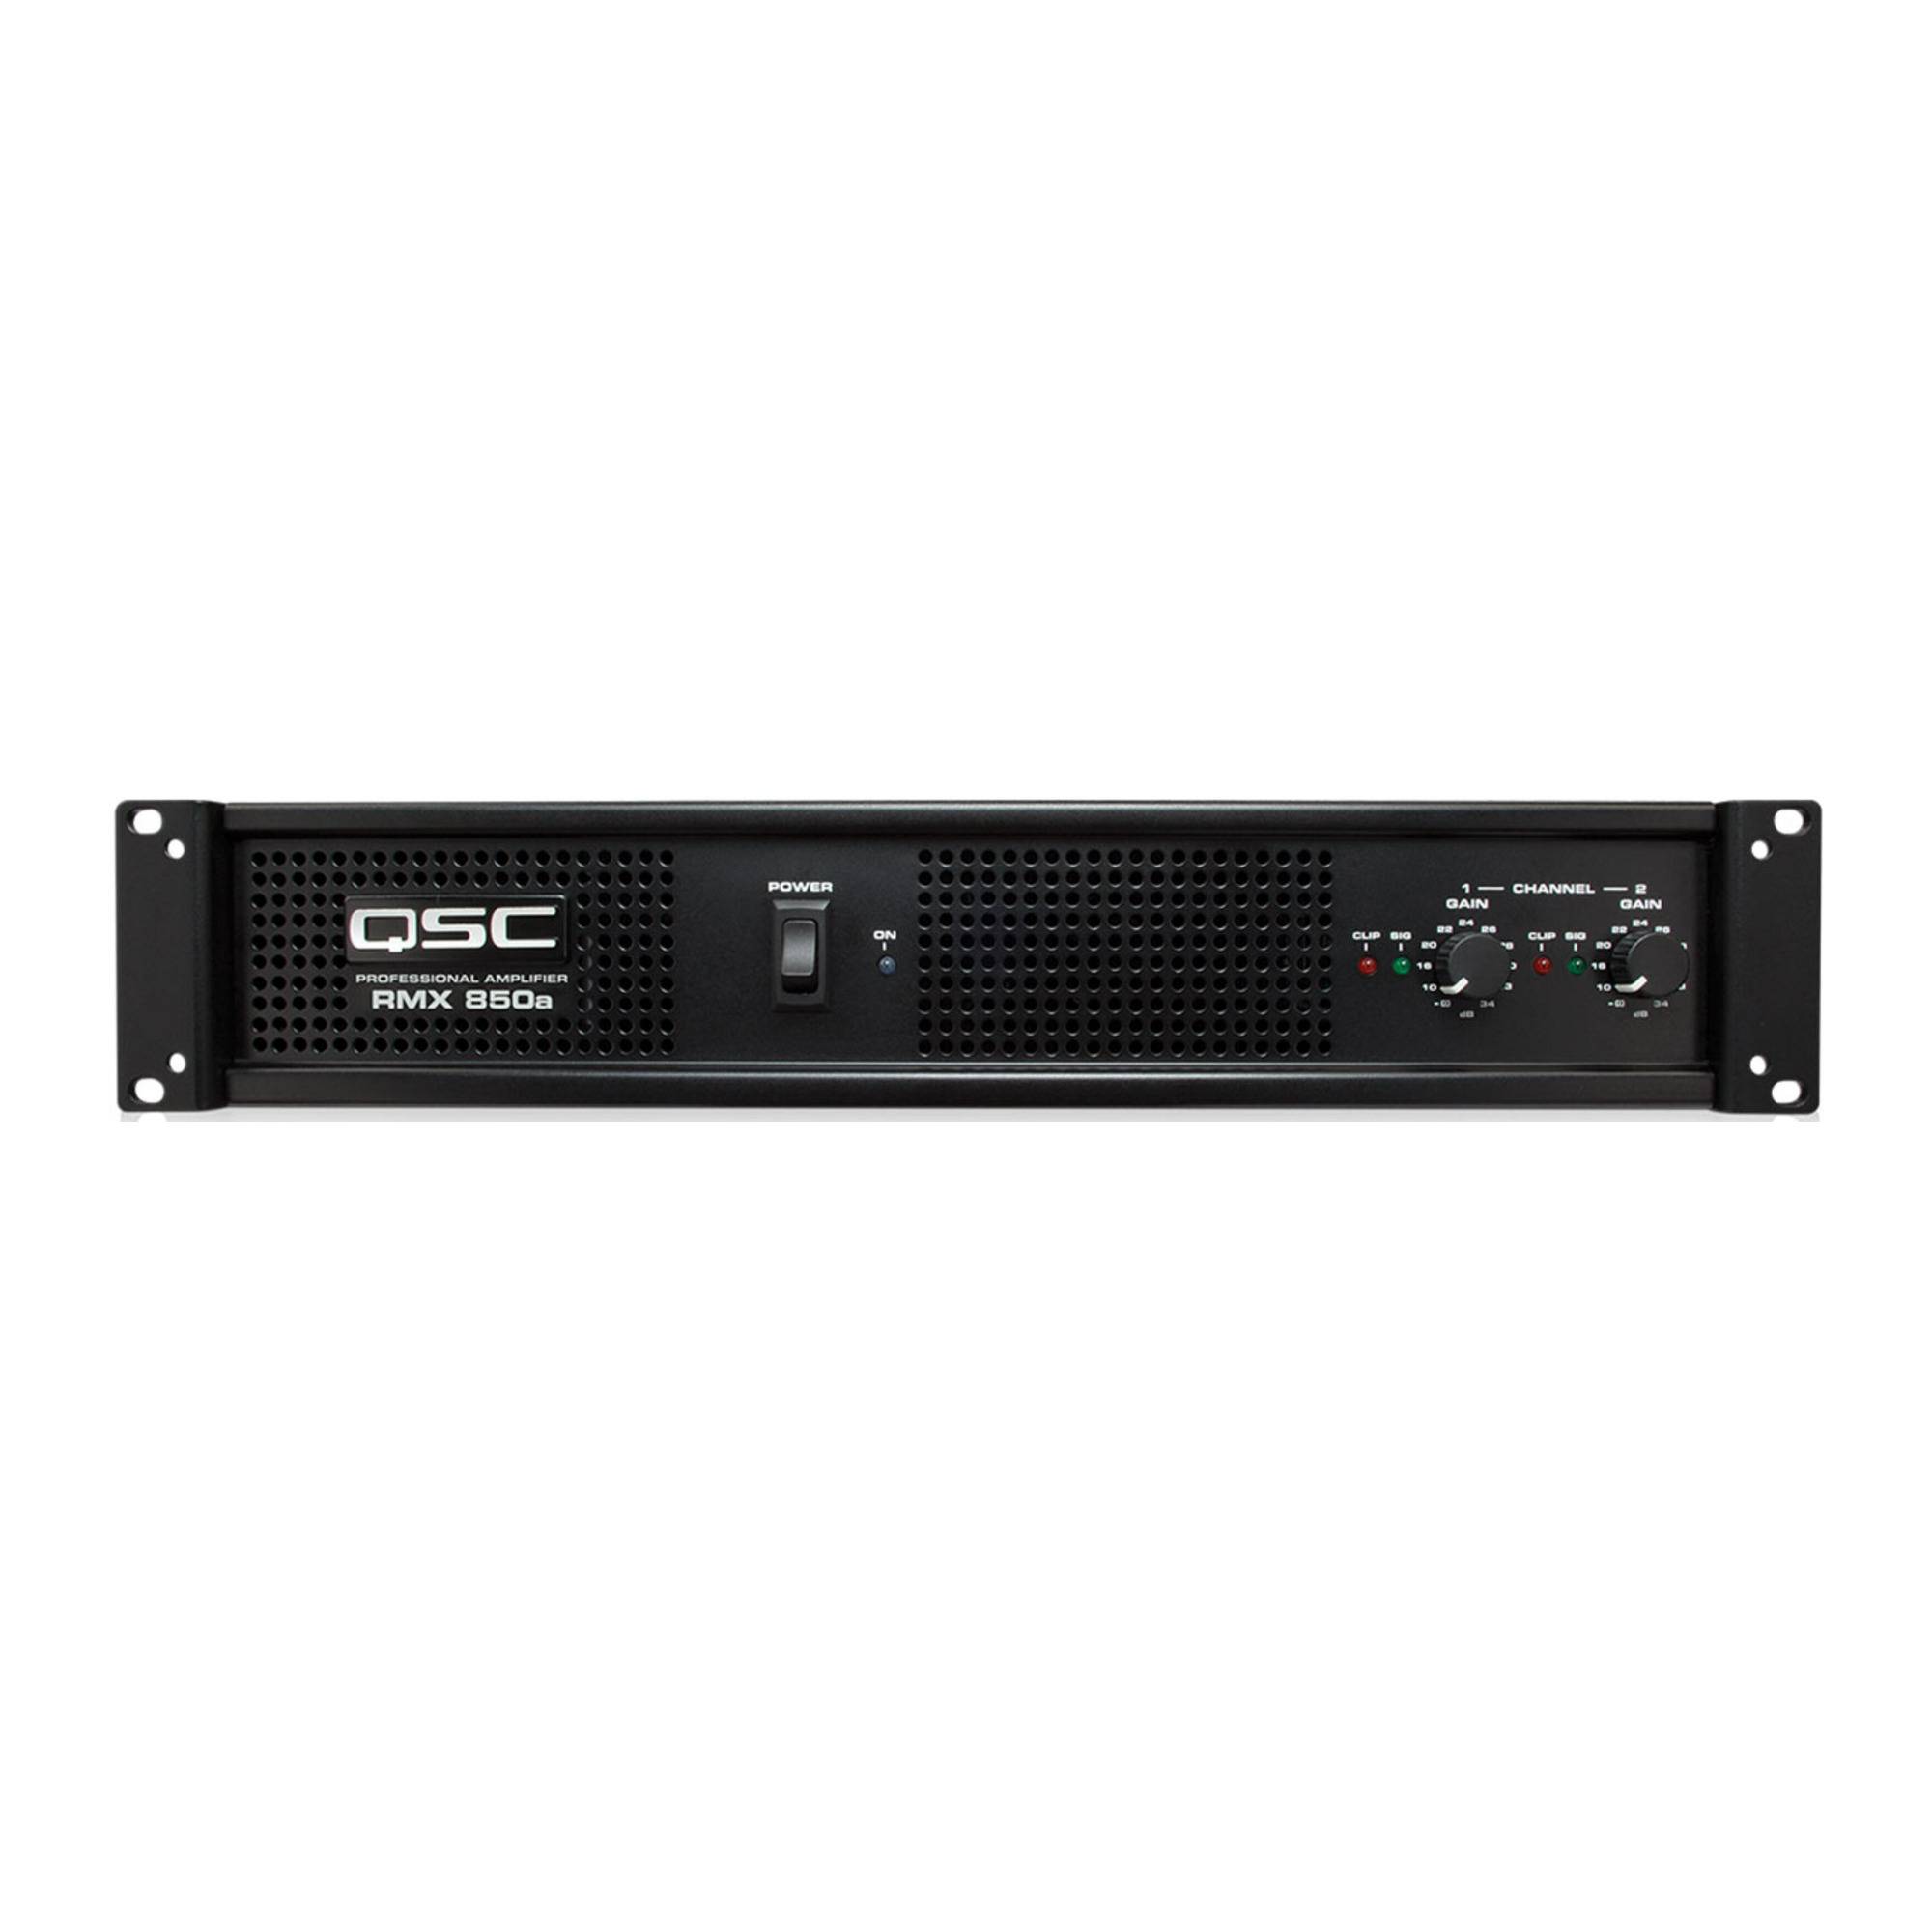 QSC RMX850a 850a Professional Performance Two Channels Compact Power Amplifier with LED Indicators